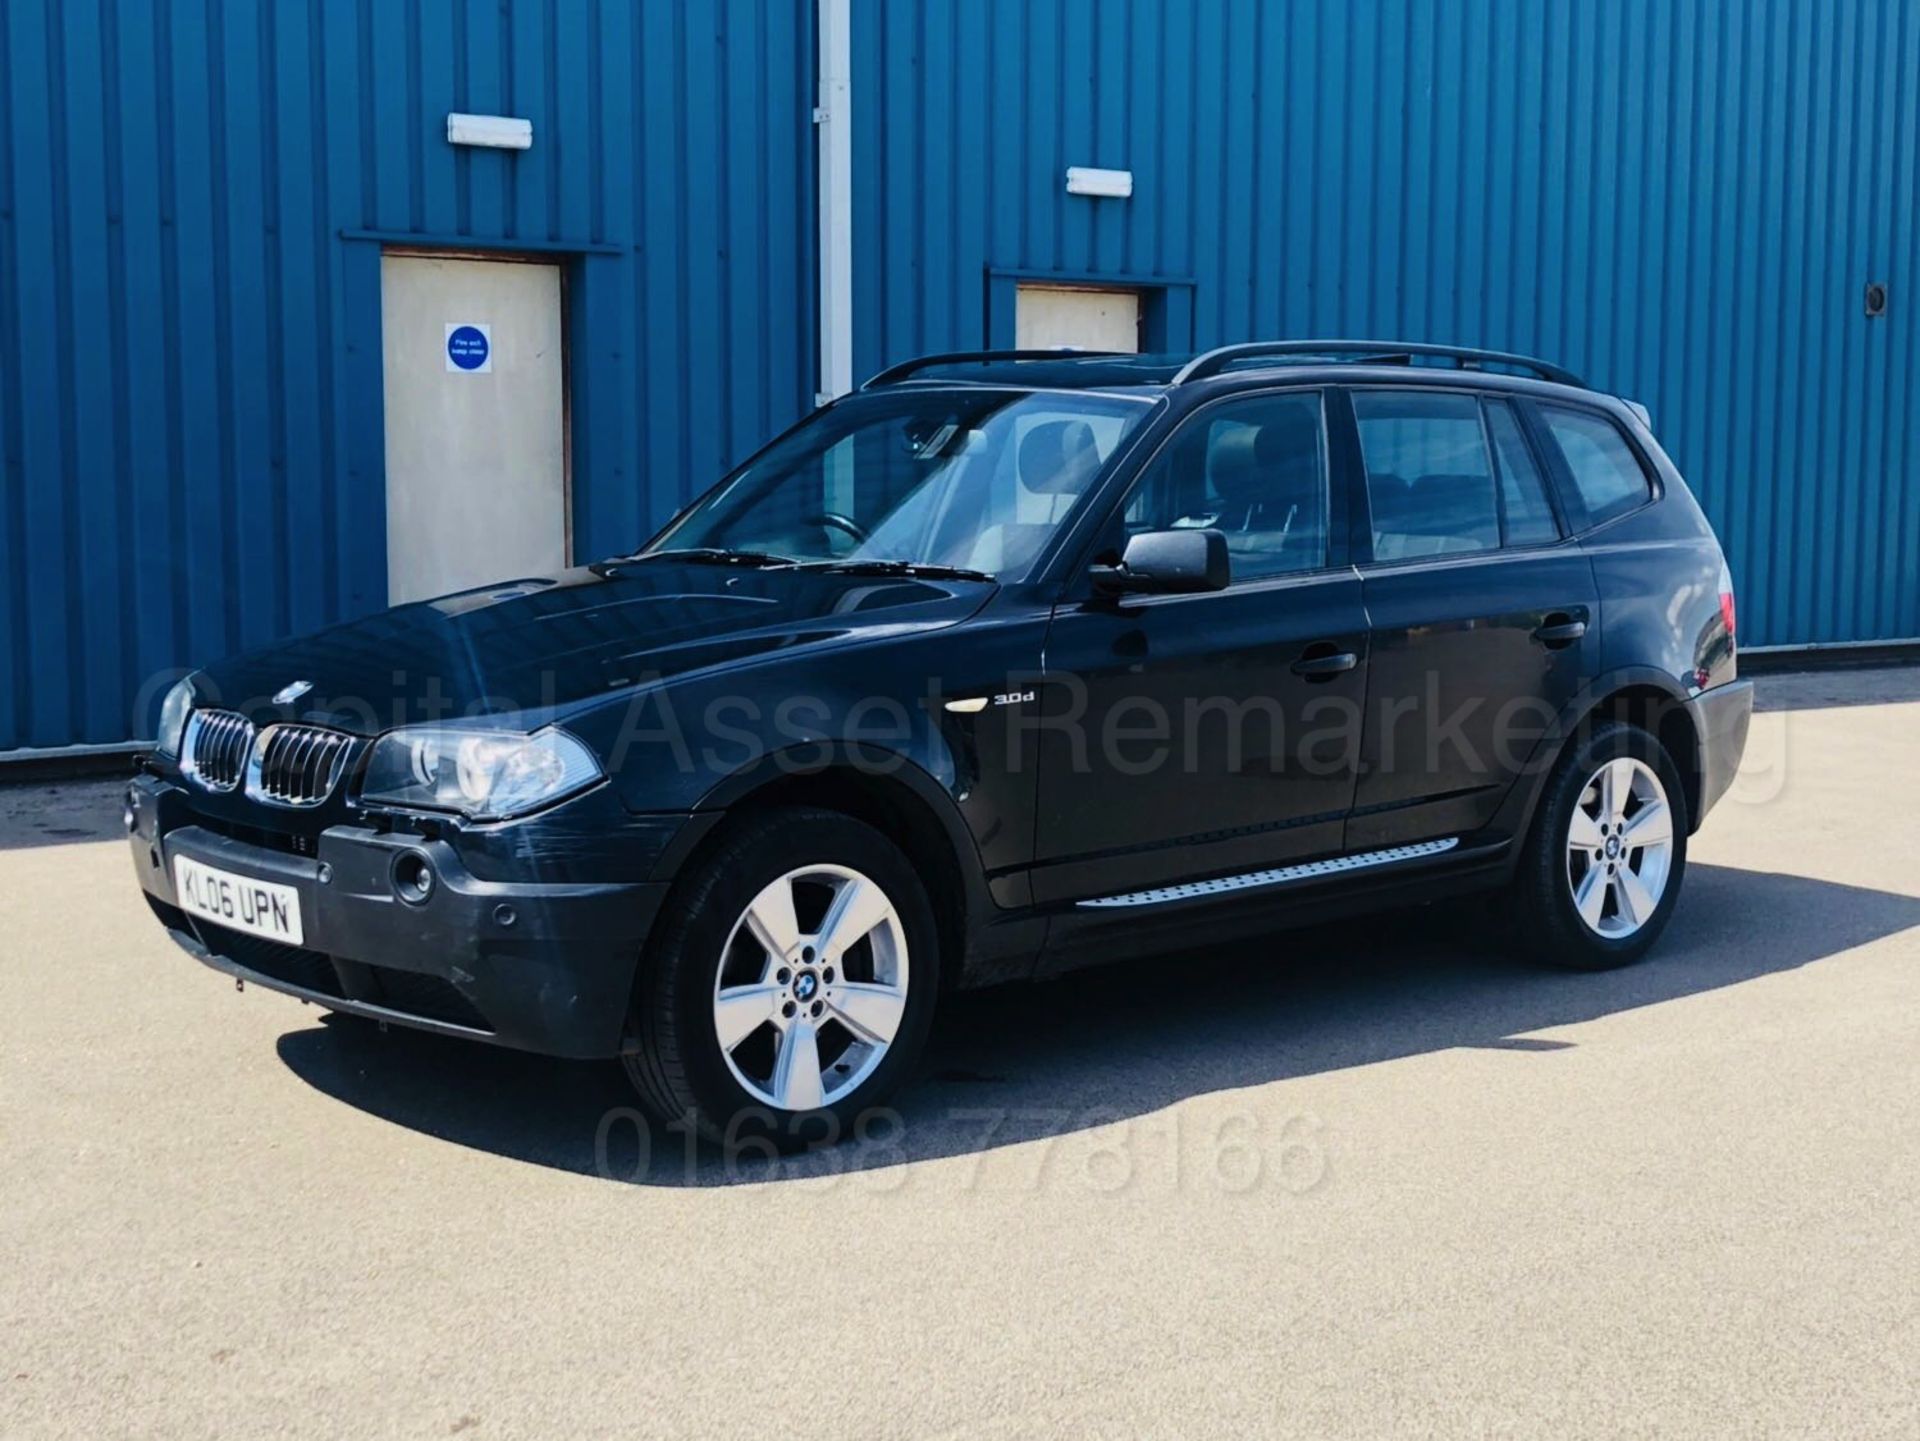 BMW X3 *SPORT EDITION* (2006) '3.0 DIESEL - 218 BHP - AUTOMATIC' *LEATHER / AIR CON* (NO VAT)